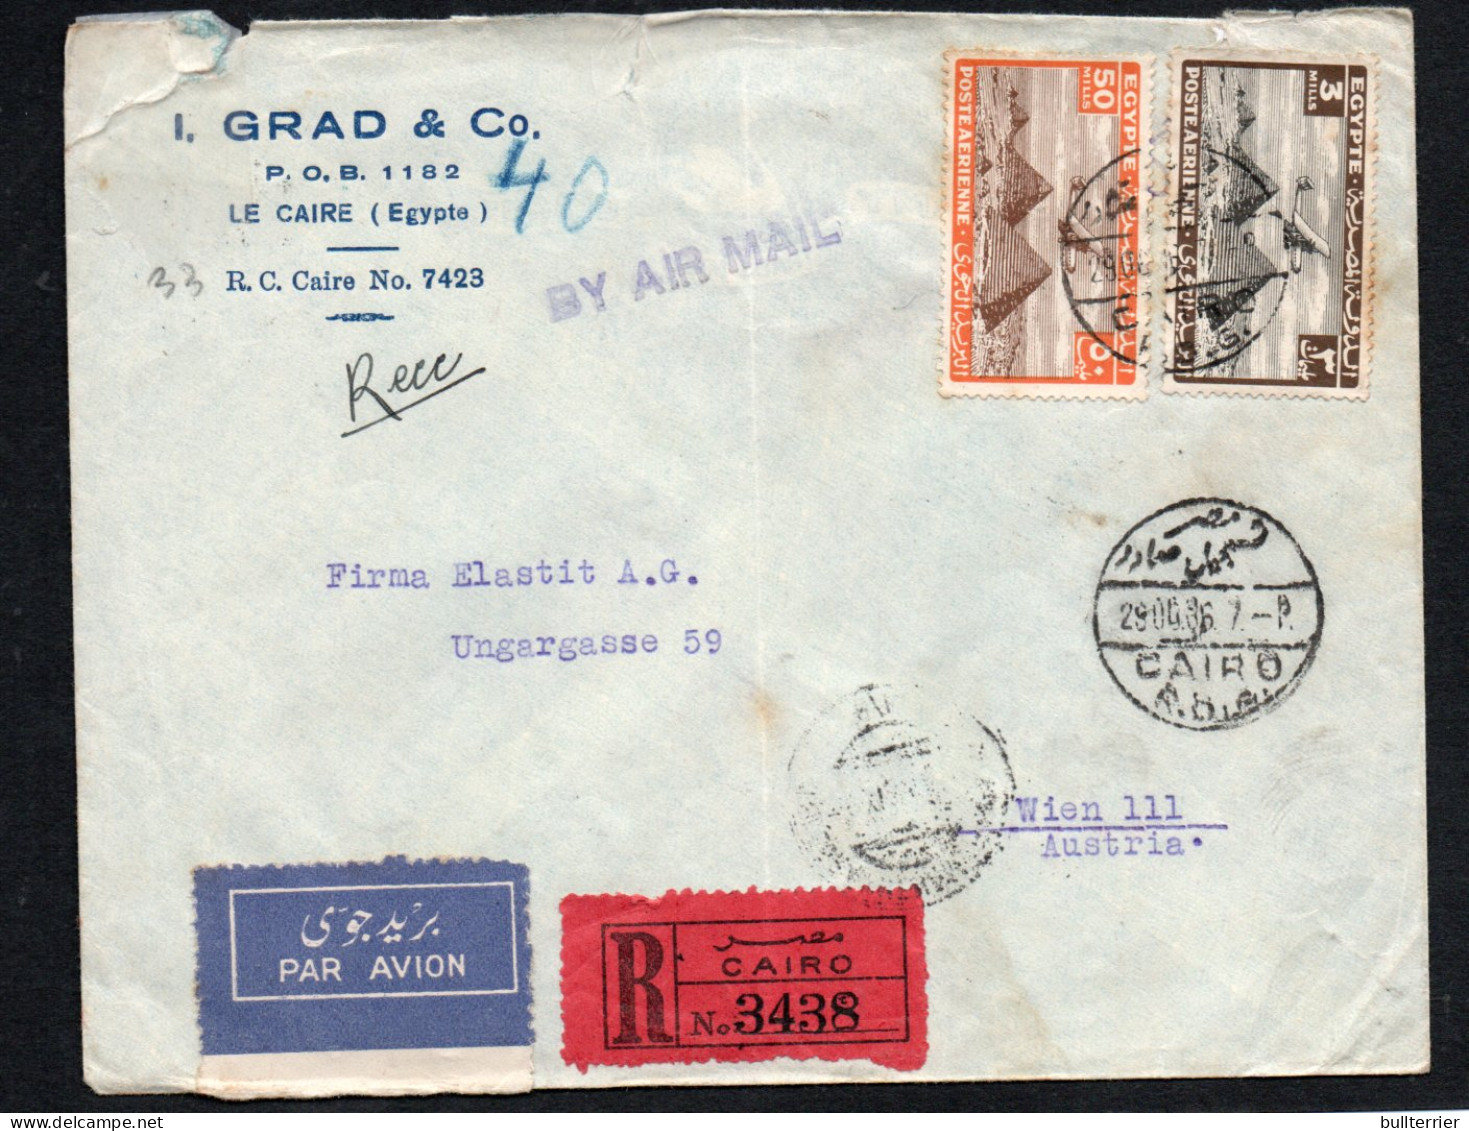 EGYPT - 1936 - IMPERIAL AIRWAYS REGISTERED COVER CAIRO TO VIENNA ,AUSTRIA WITH BACKSTAMP - Storia Postale